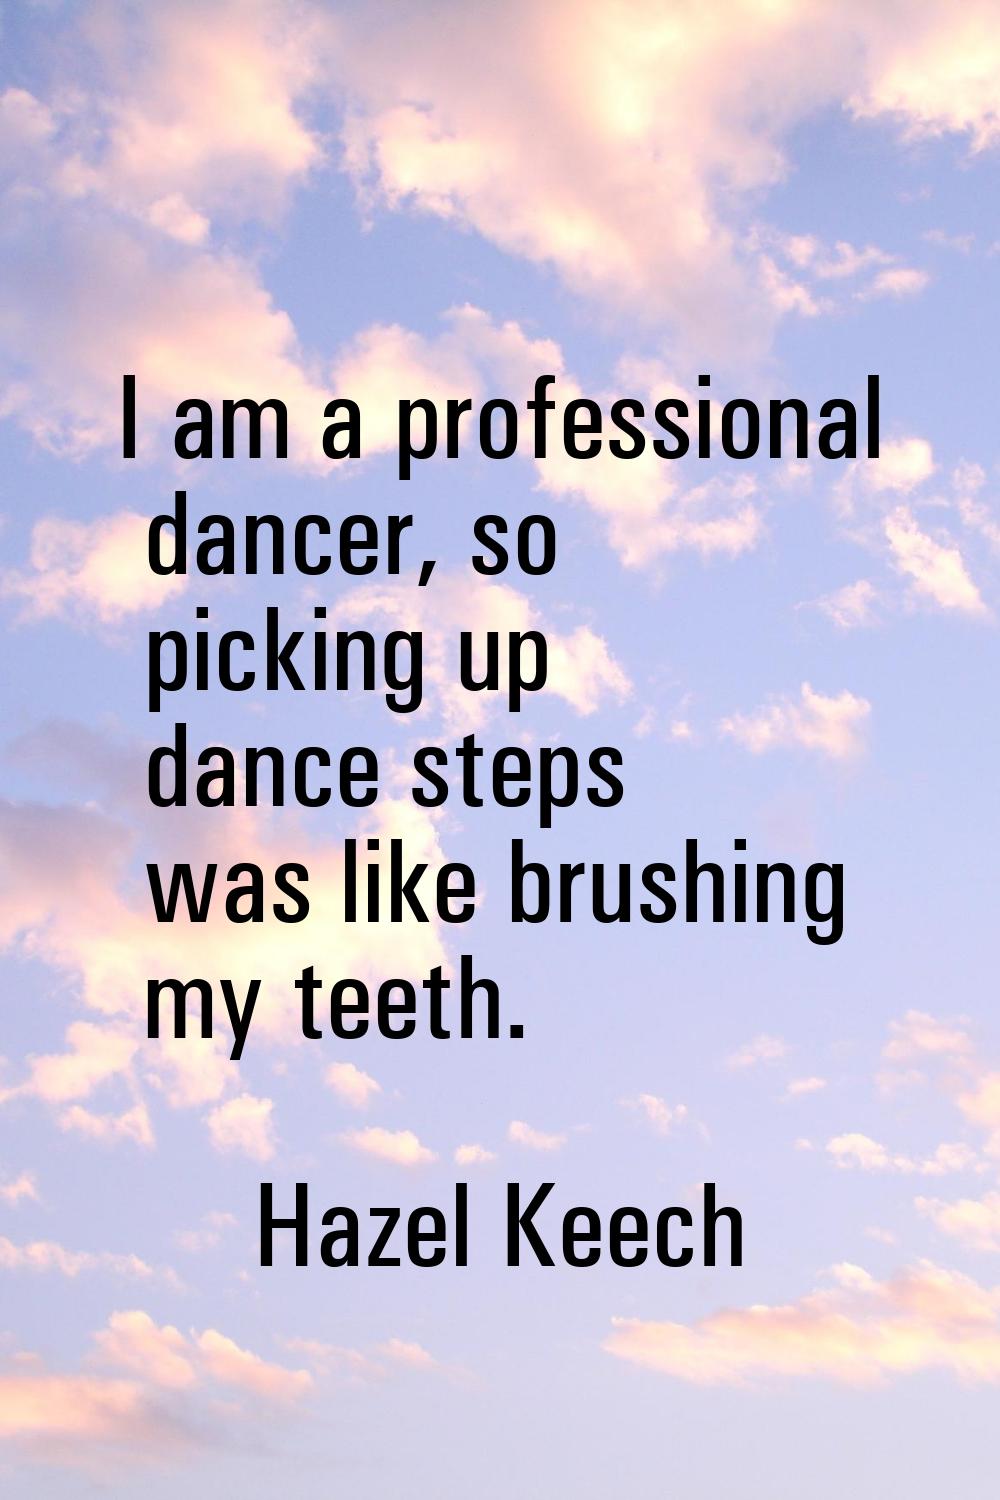 I am a professional dancer, so picking up dance steps was like brushing my teeth.